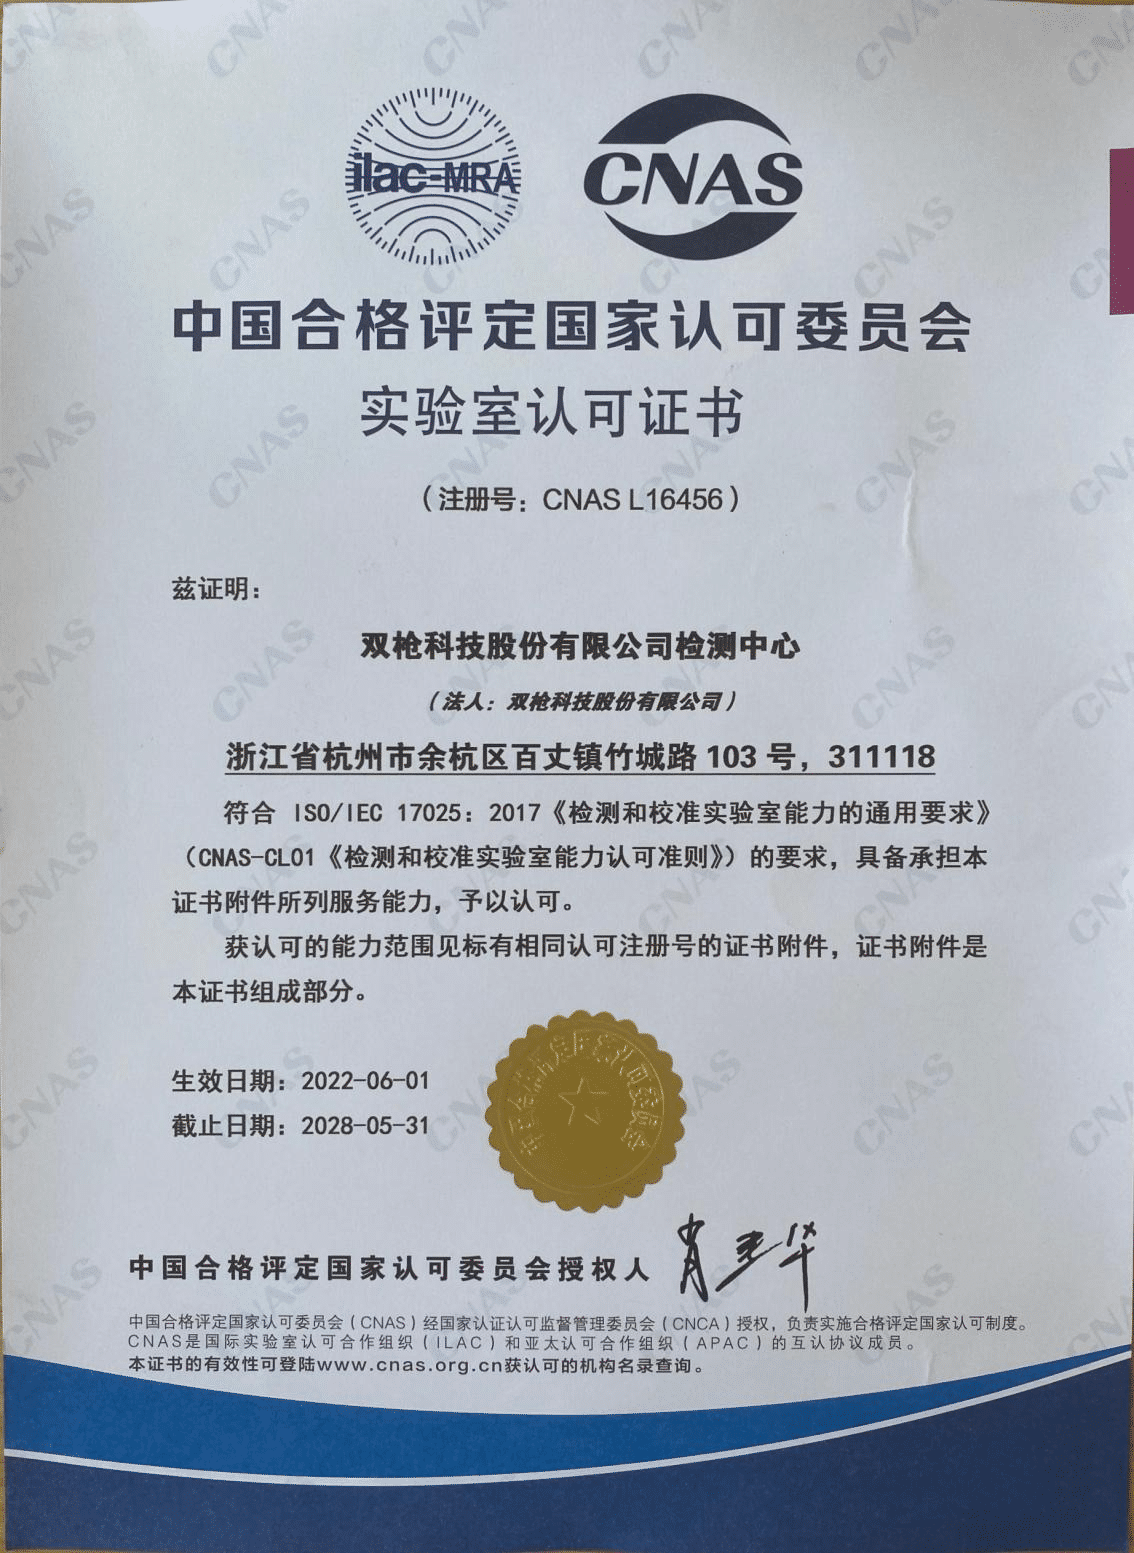 Suncha Testing Center was warded the certificate of CNAS (2)